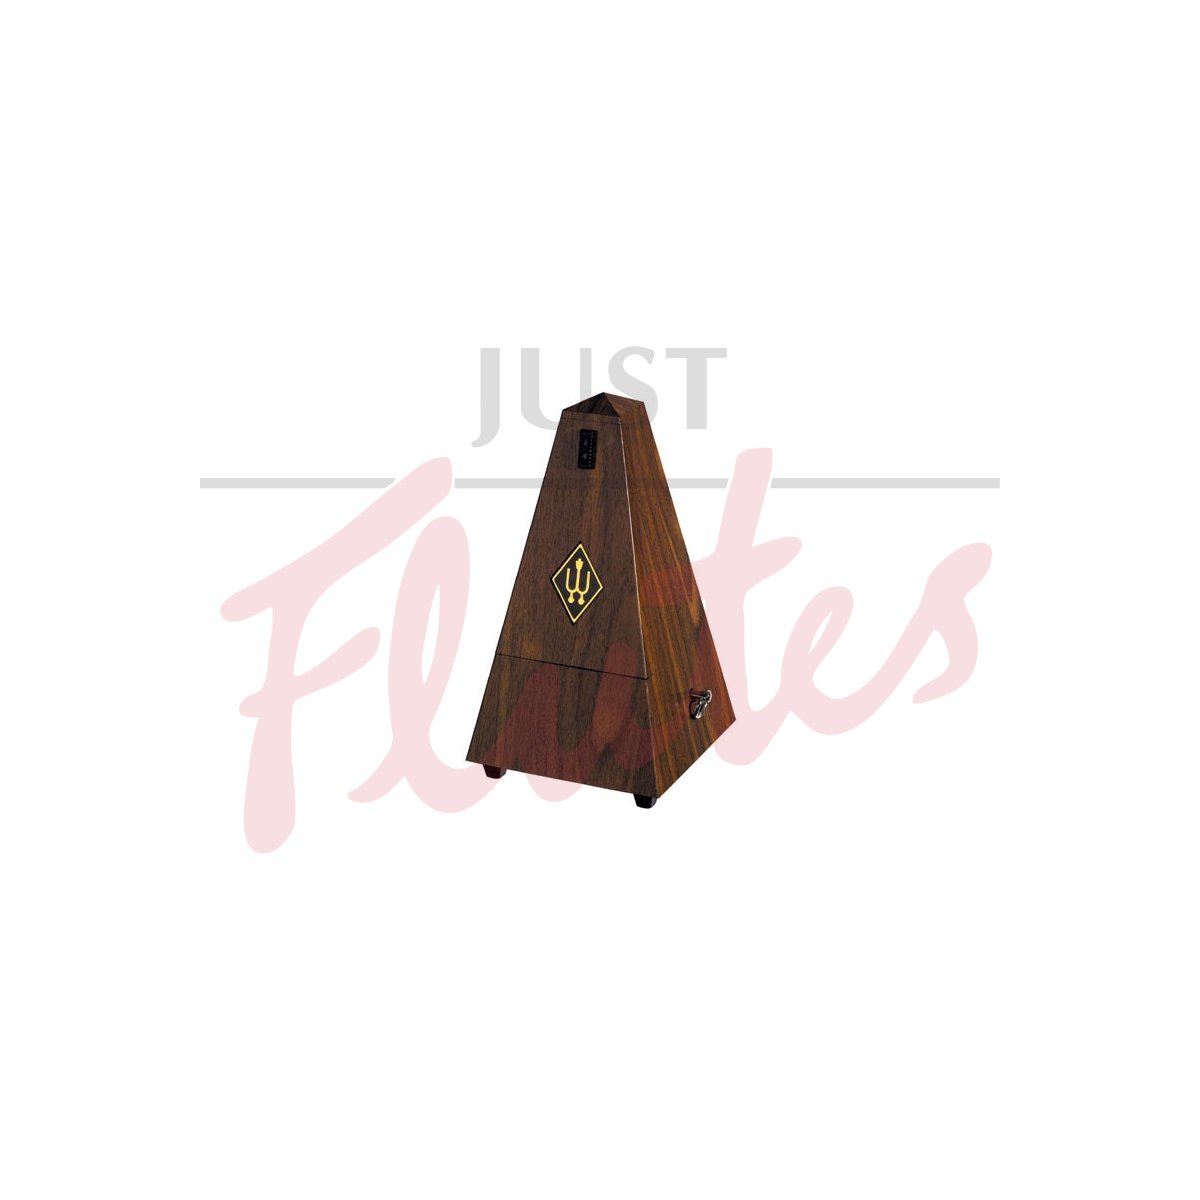 Wittner 855131 Plastic Pyramid Metronome with Bell, Walnut Finish